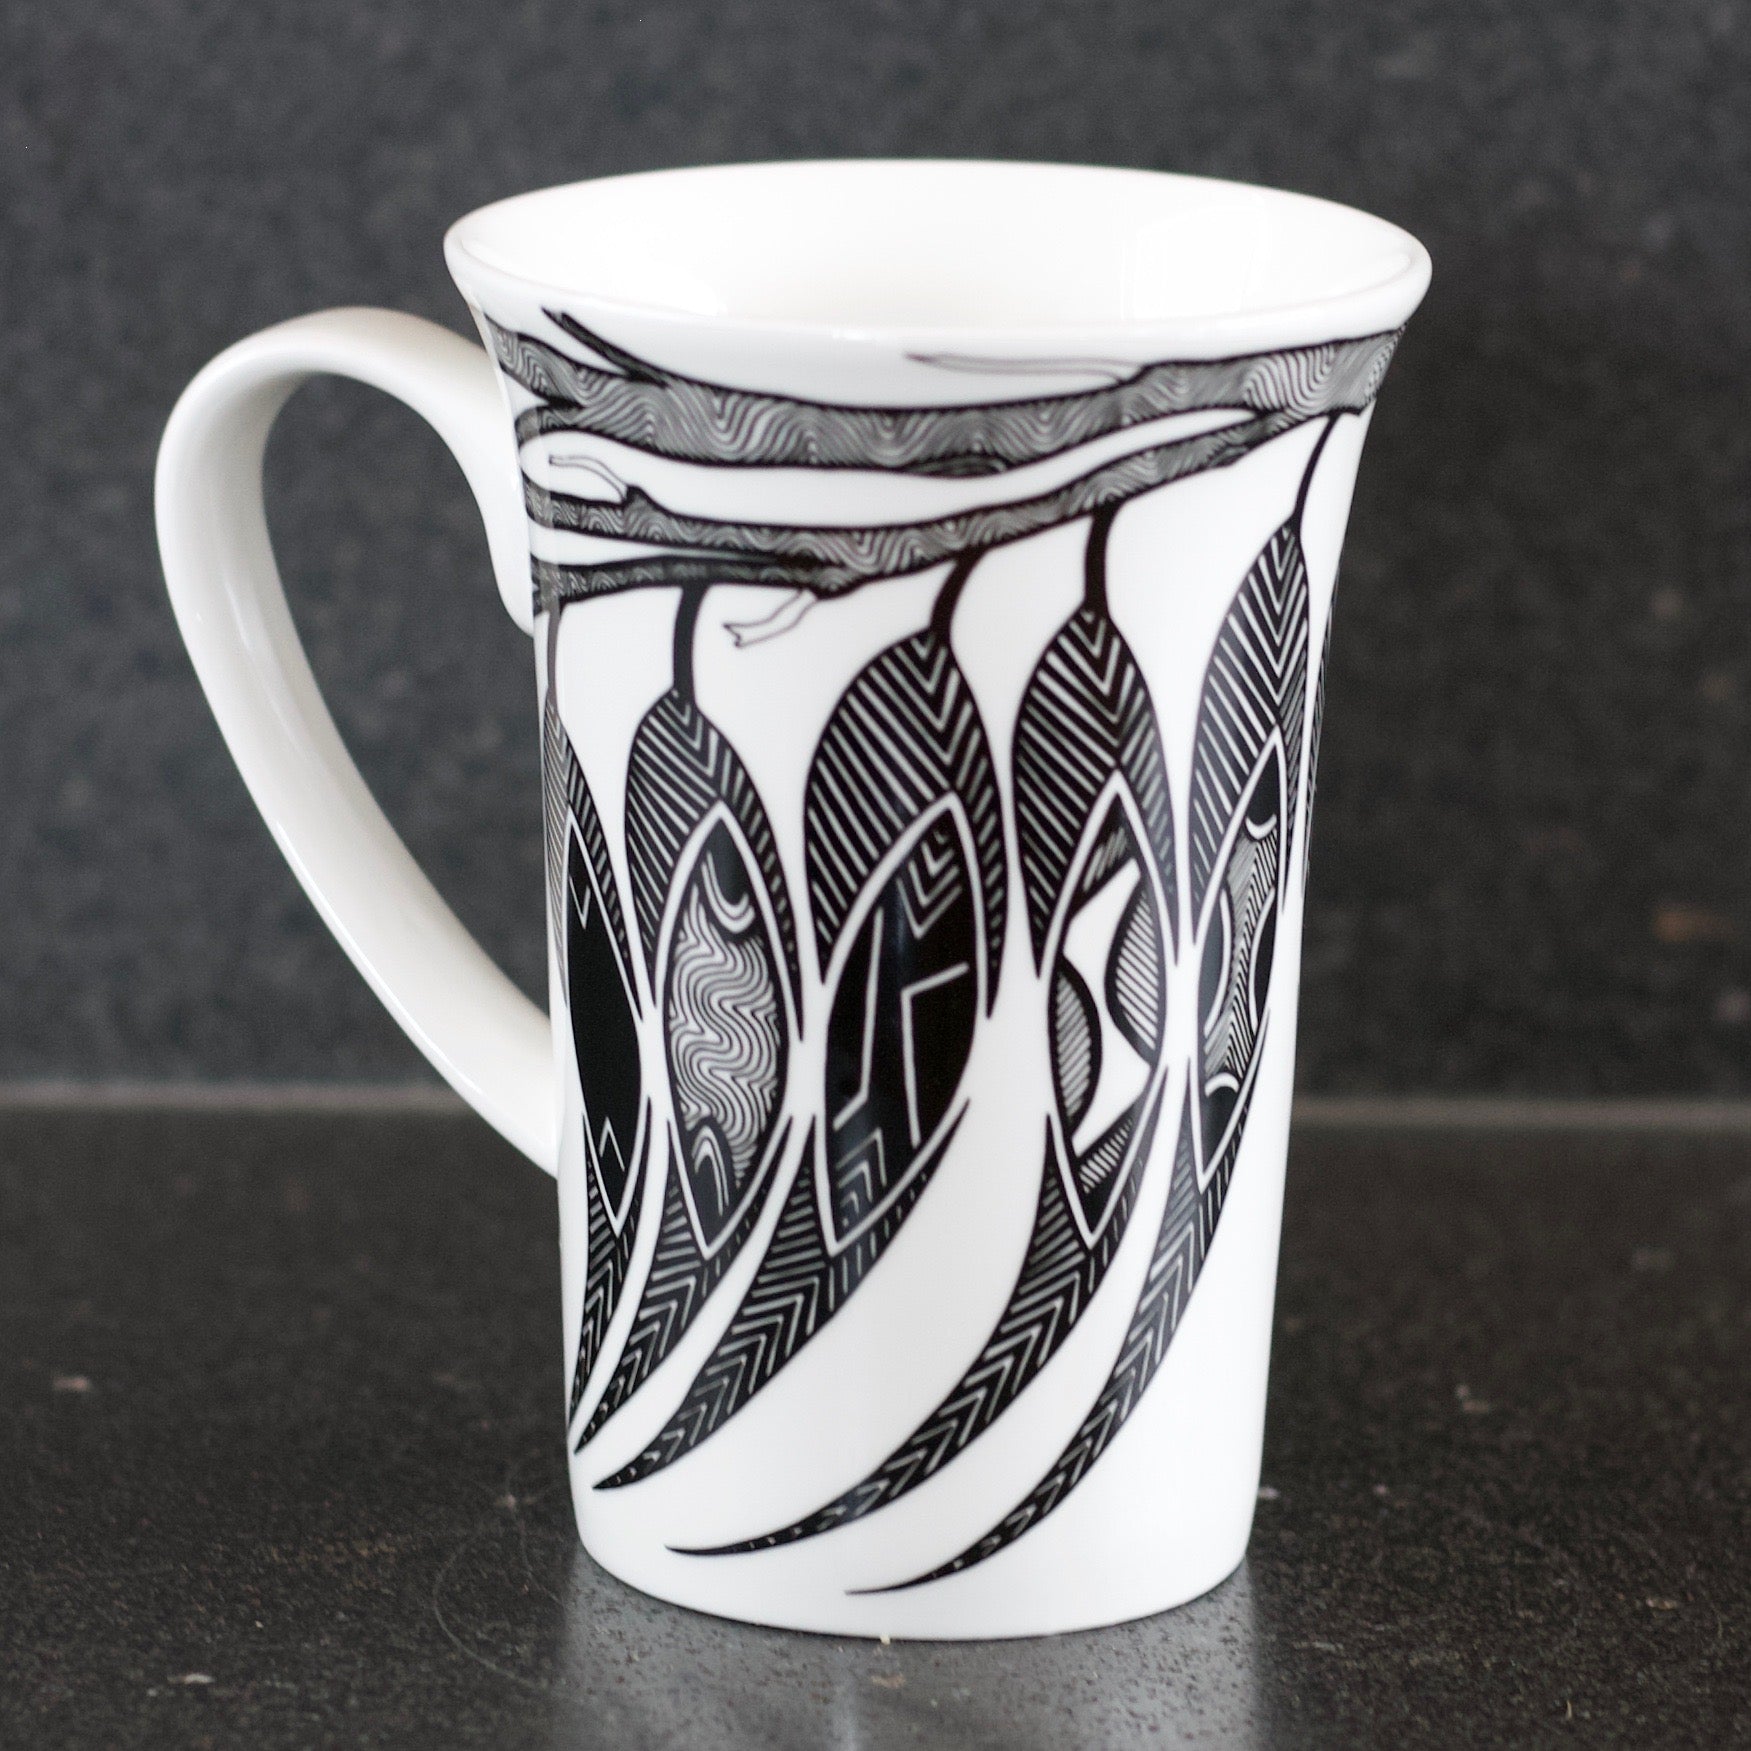 Dancing Wombat Mug with gum leaves by Mick Harding,